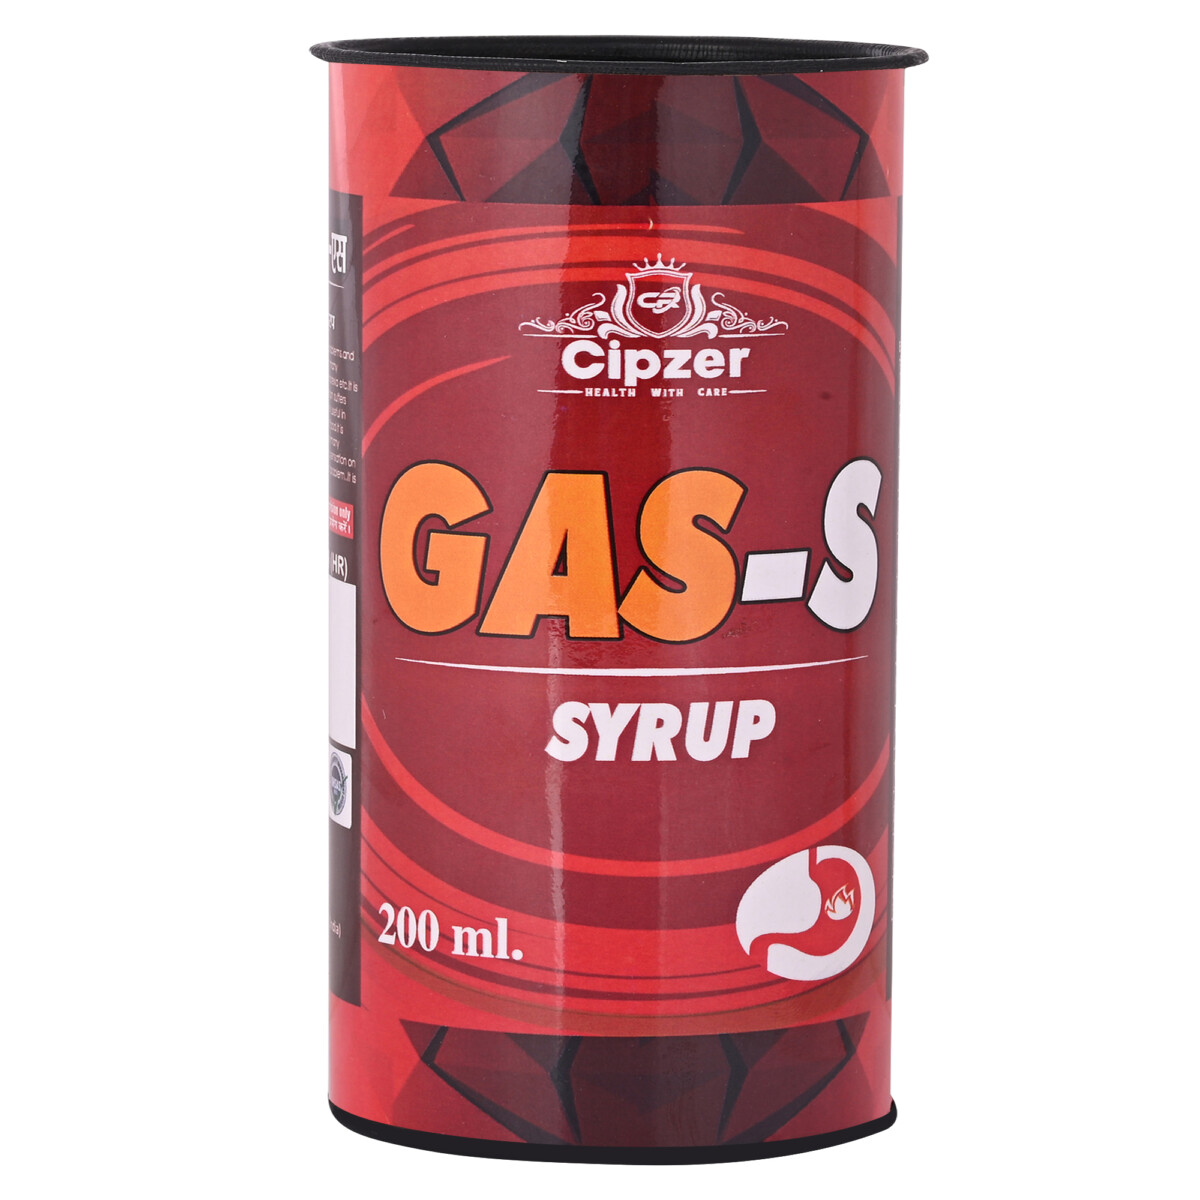 Gas-S Syrup